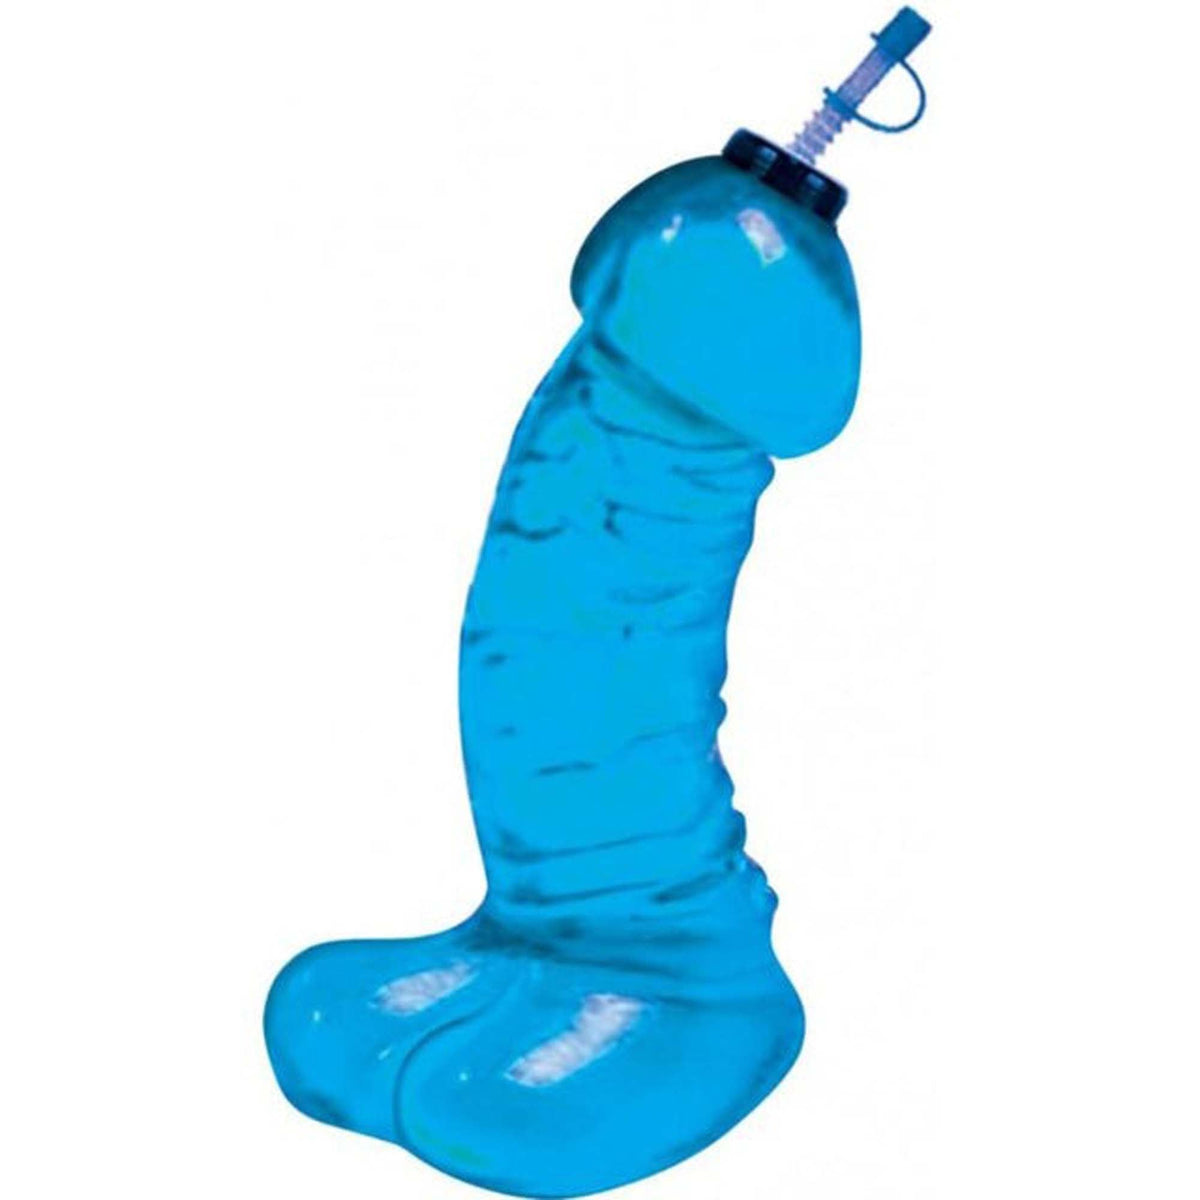 EP Product Canada INC. Bachelorette Bachelorette Party Blue Dicky Chug Bottle with Straw, 16 Oz, 1 Count 818631021086